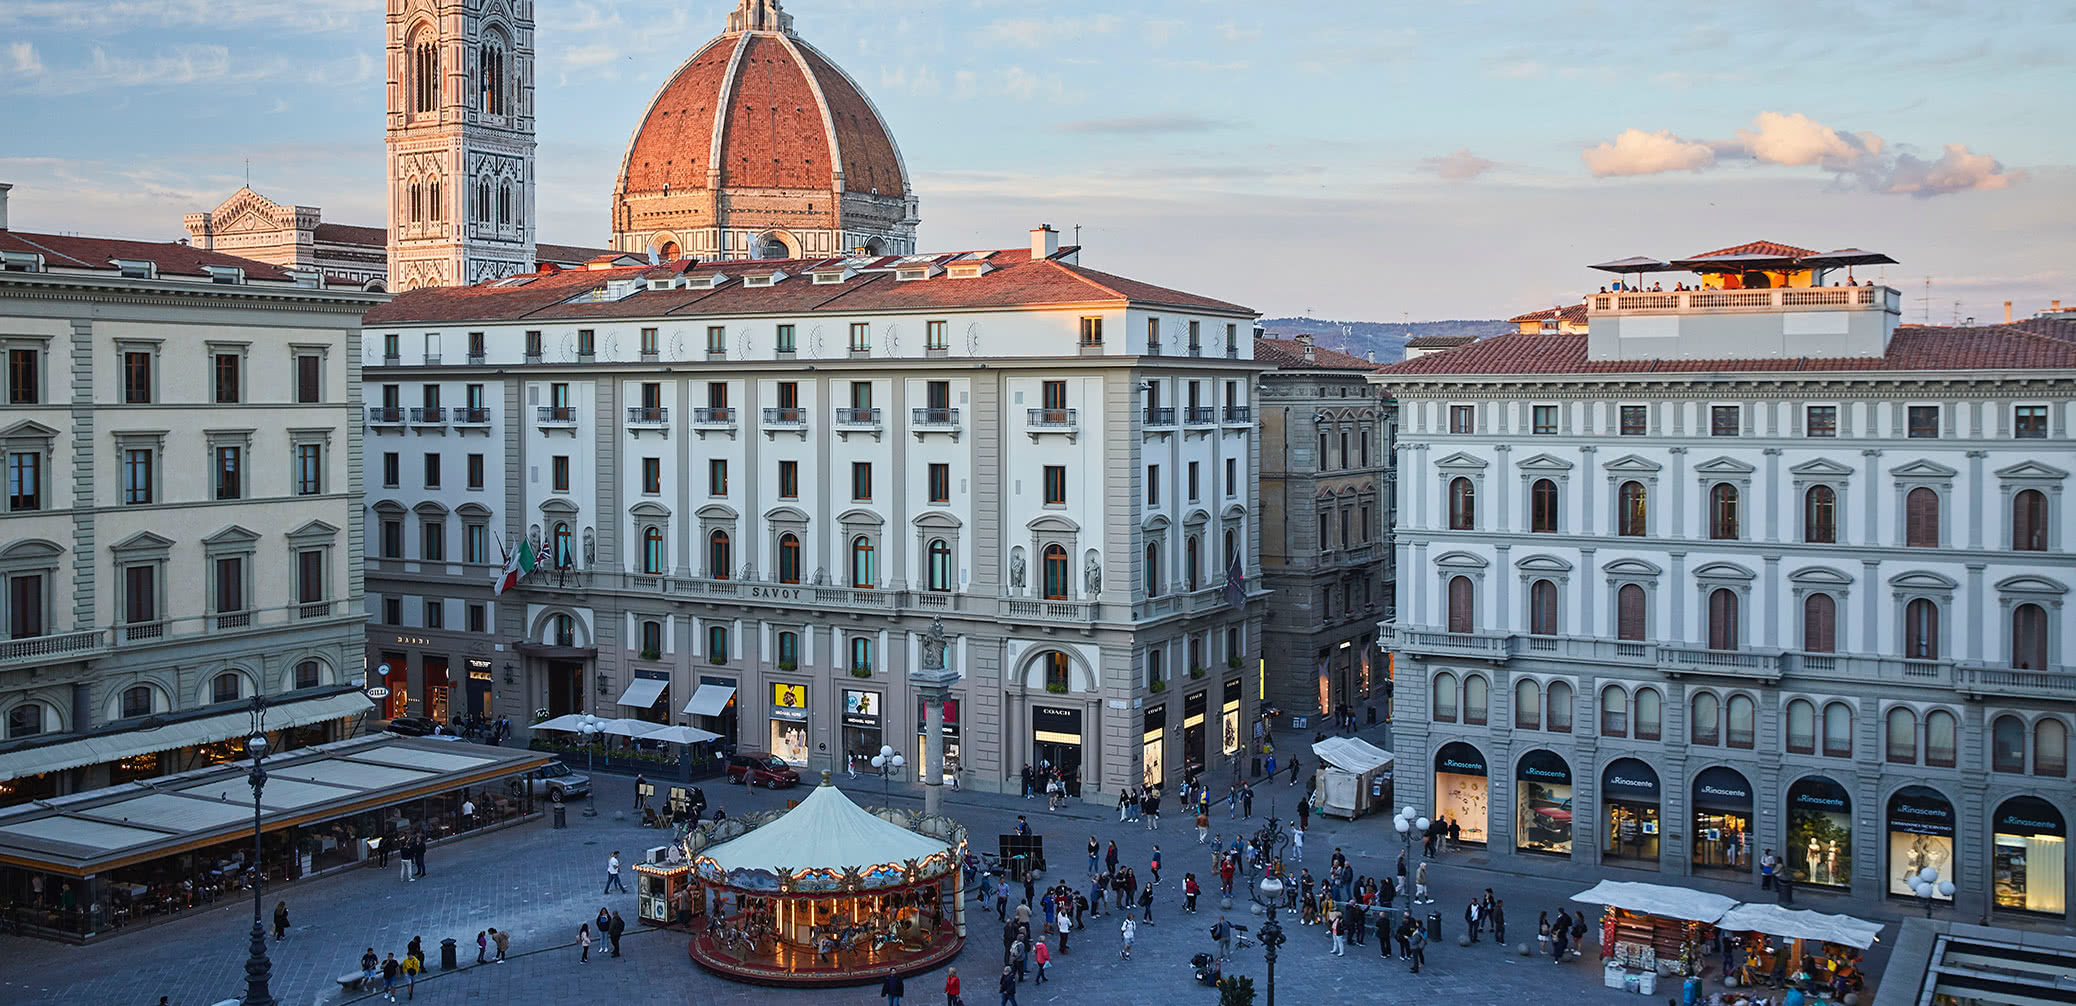 Review: Hotel Savoy, Florence